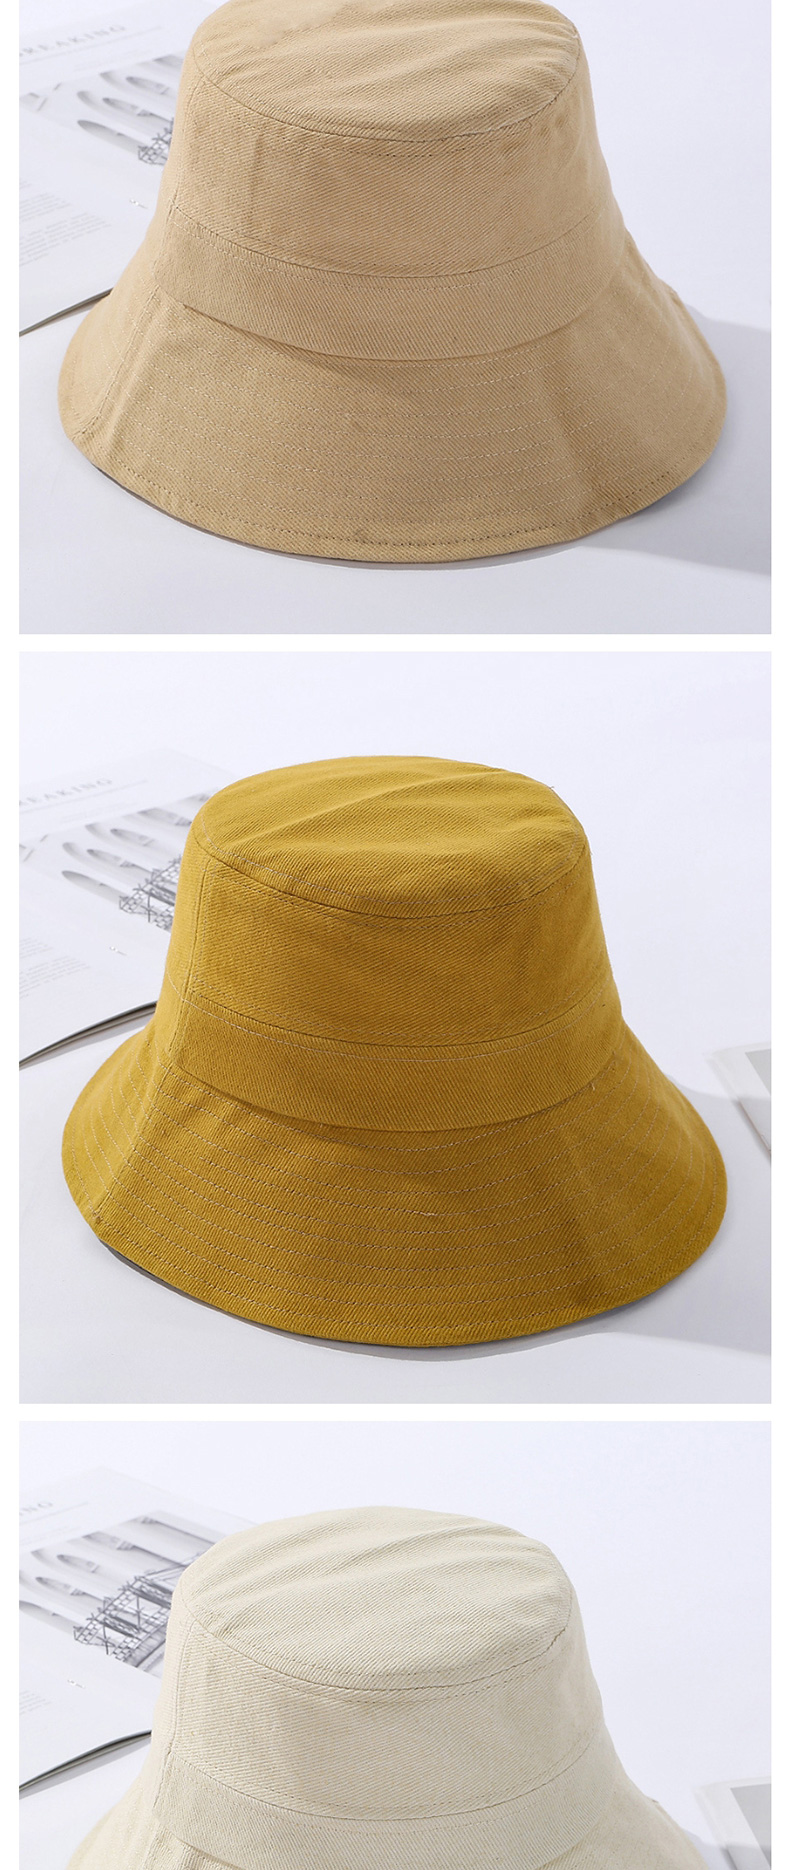 Fashion Beige Cotton Sewing Thread Small Brimmed Hat,Sun Hats